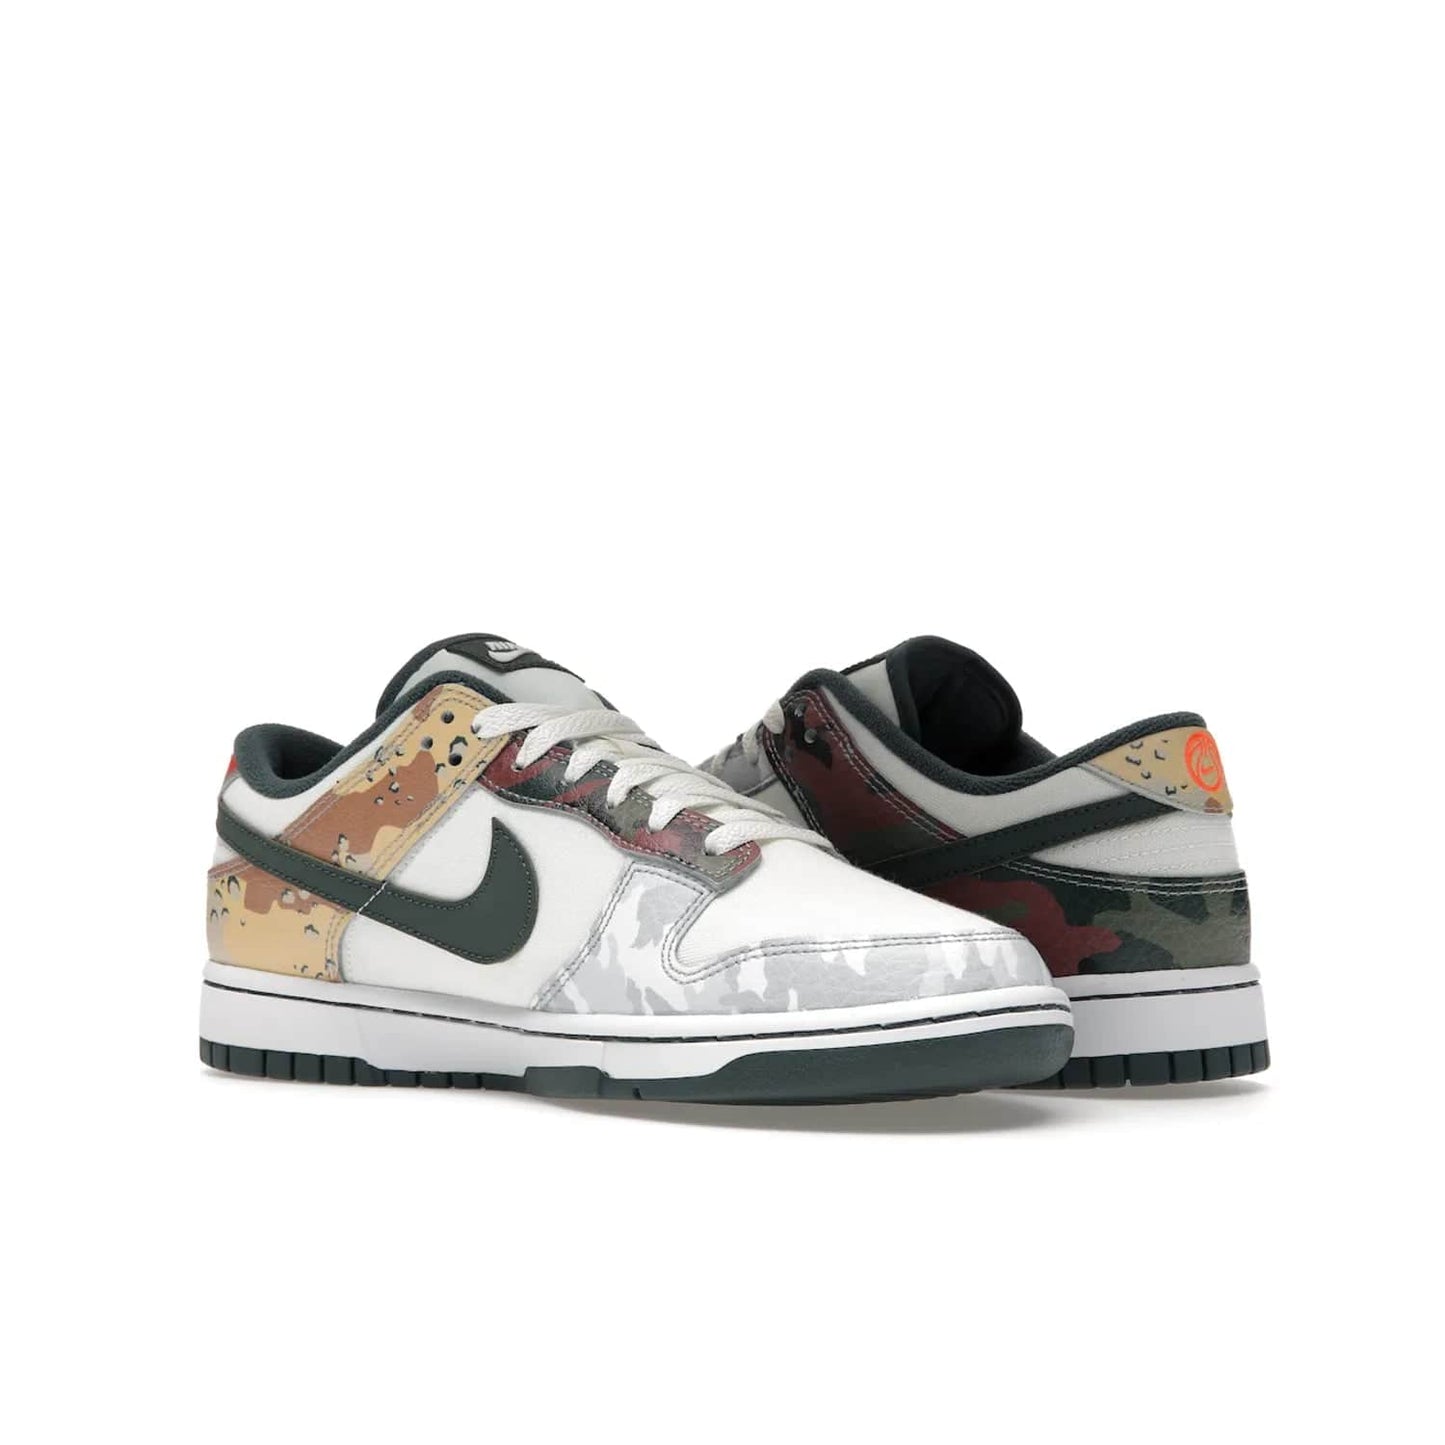 Nike Dunk Low SE Sail Multi-Camo - Image 23 - Only at www.BallersClubKickz.com - Classic design meets statement style in the Nike Dunk Low SE Sail Multi-Camo. White leather base with multi-color camo overlays, vibrant Nike Swooshes, and orange Nike embroidery. Get yours August 2021.